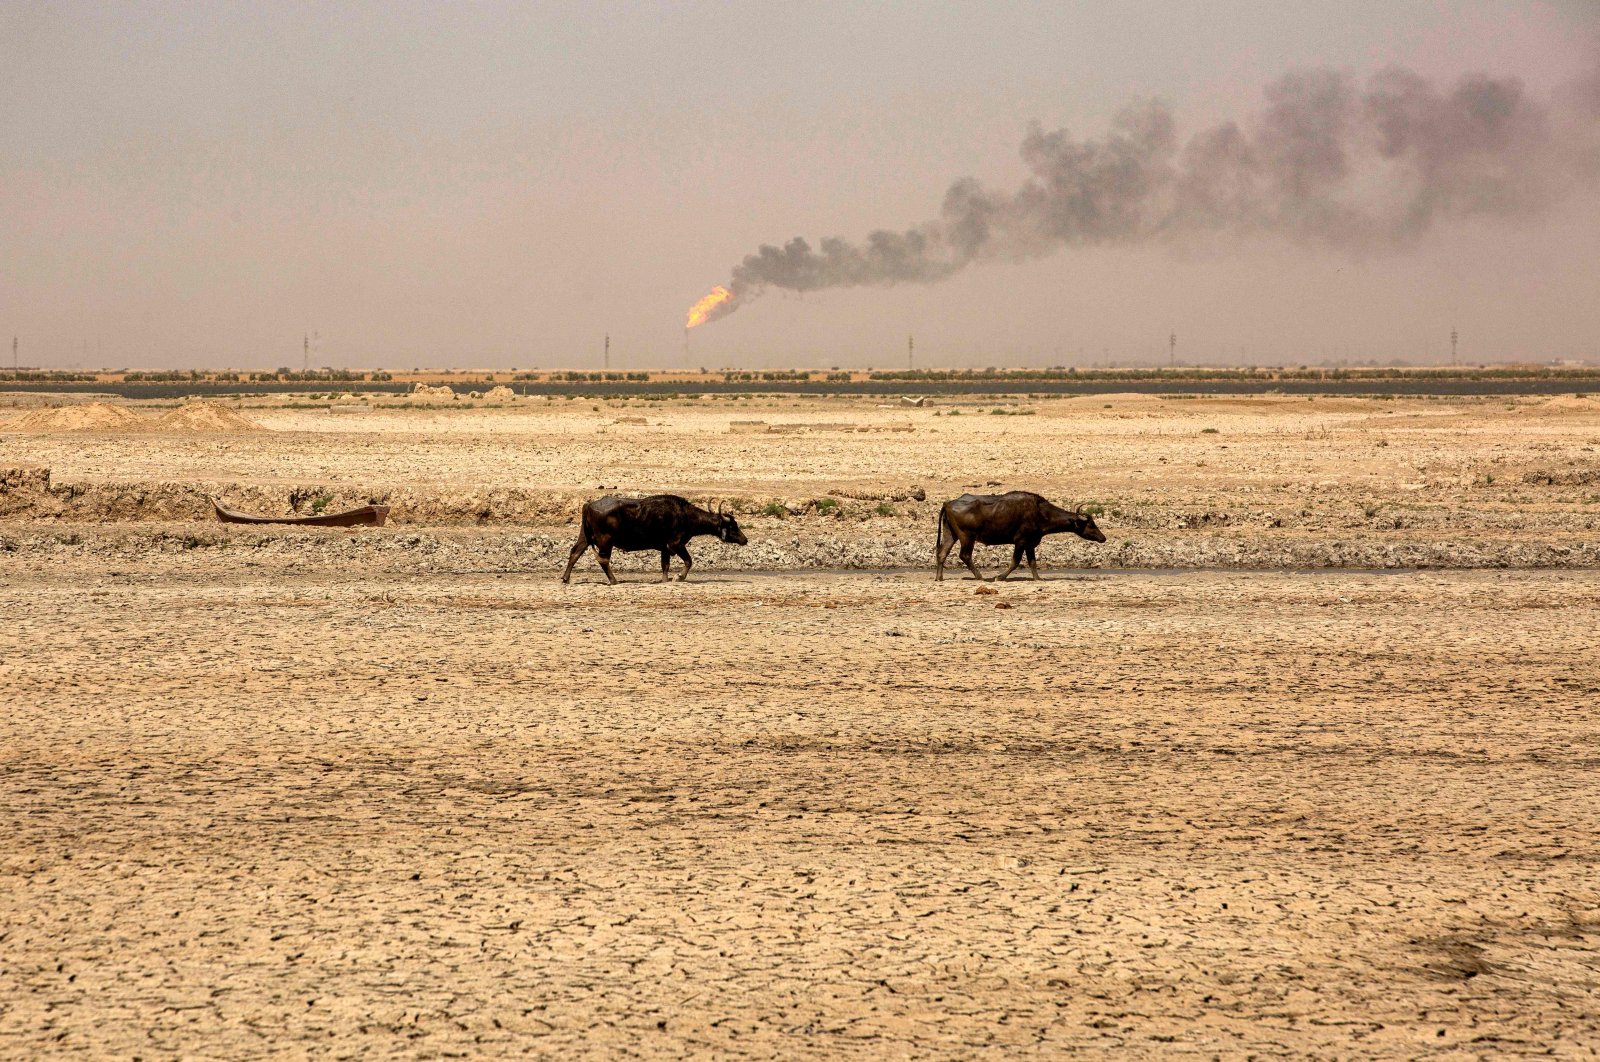 Water buffaloes walk in dried-up marshes near al-Qurnah natural gas field in Basra, Iraq, Aug. 10, 2022. (AFP Photo)